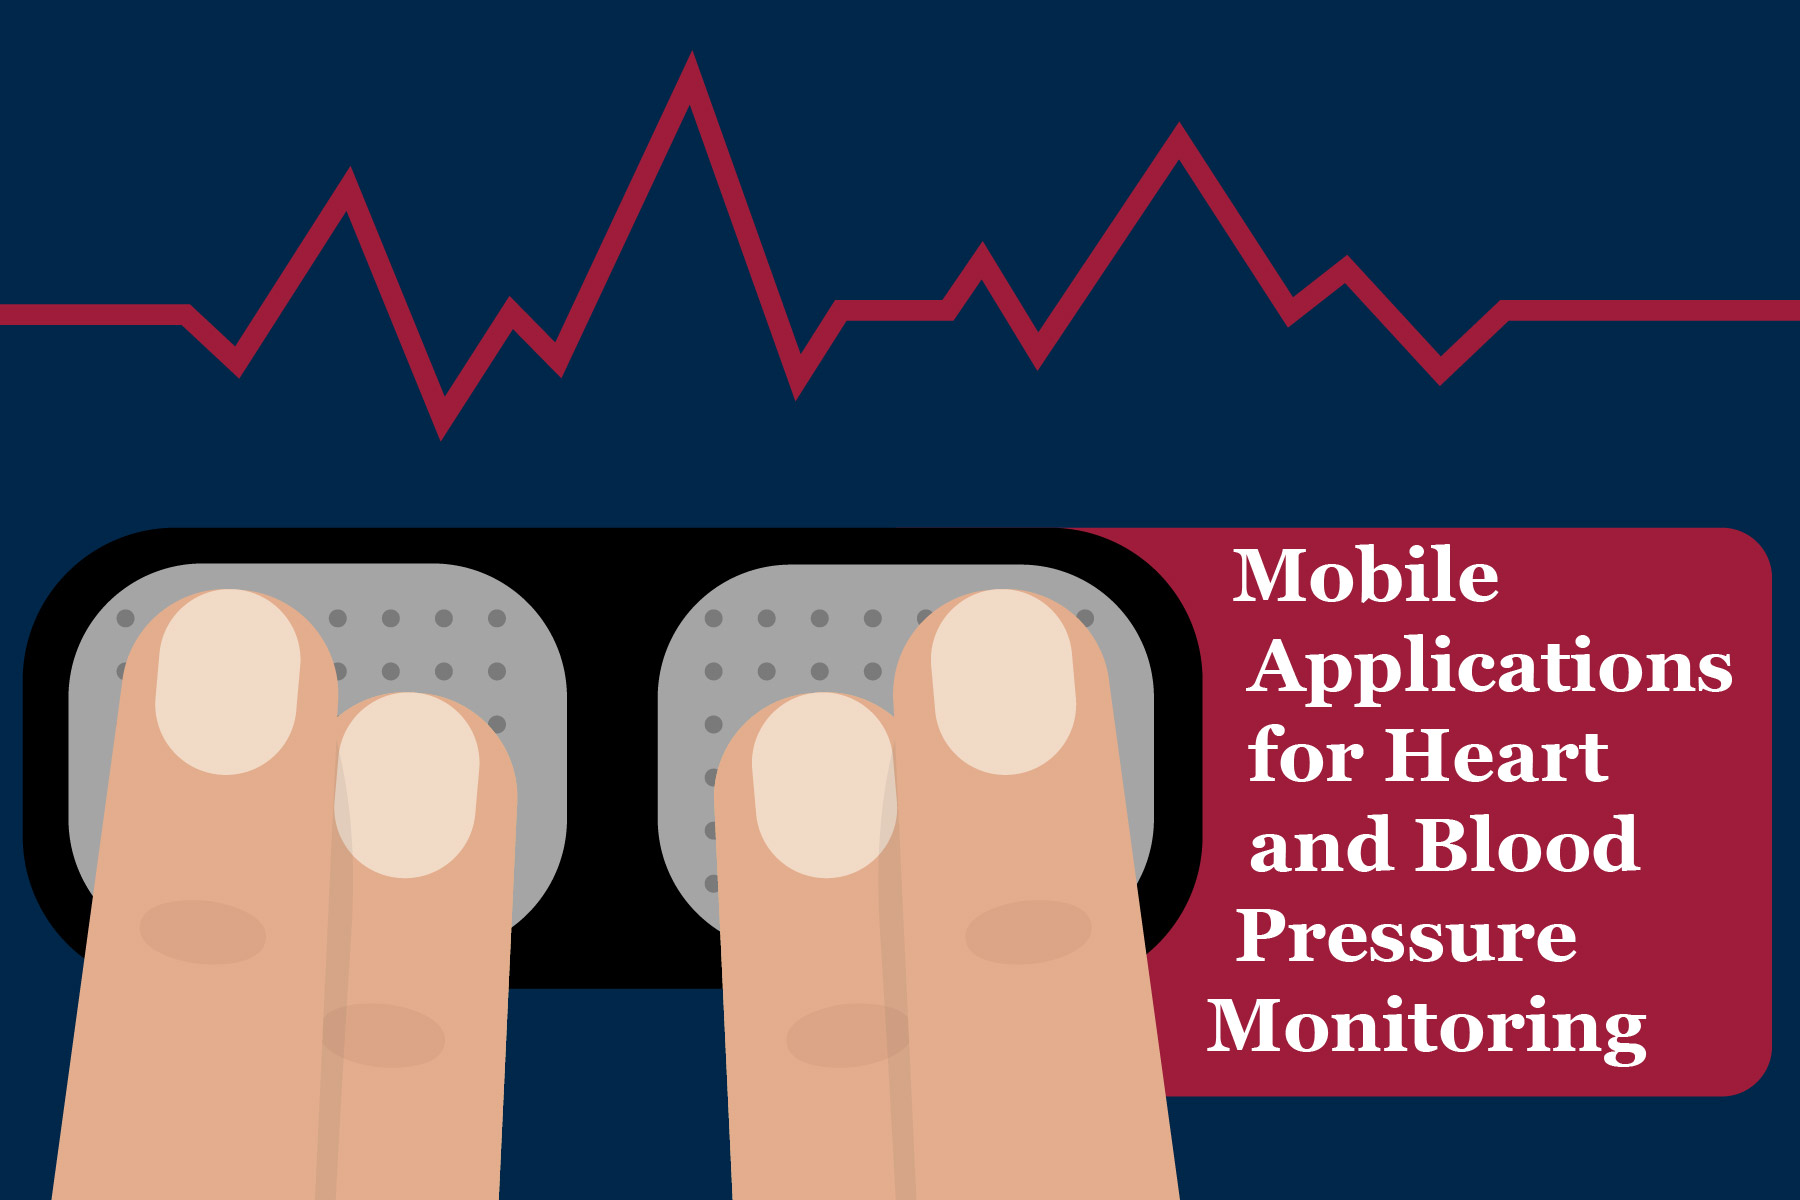 Mobile Applications for Heart and Blood Pressure Monitoring